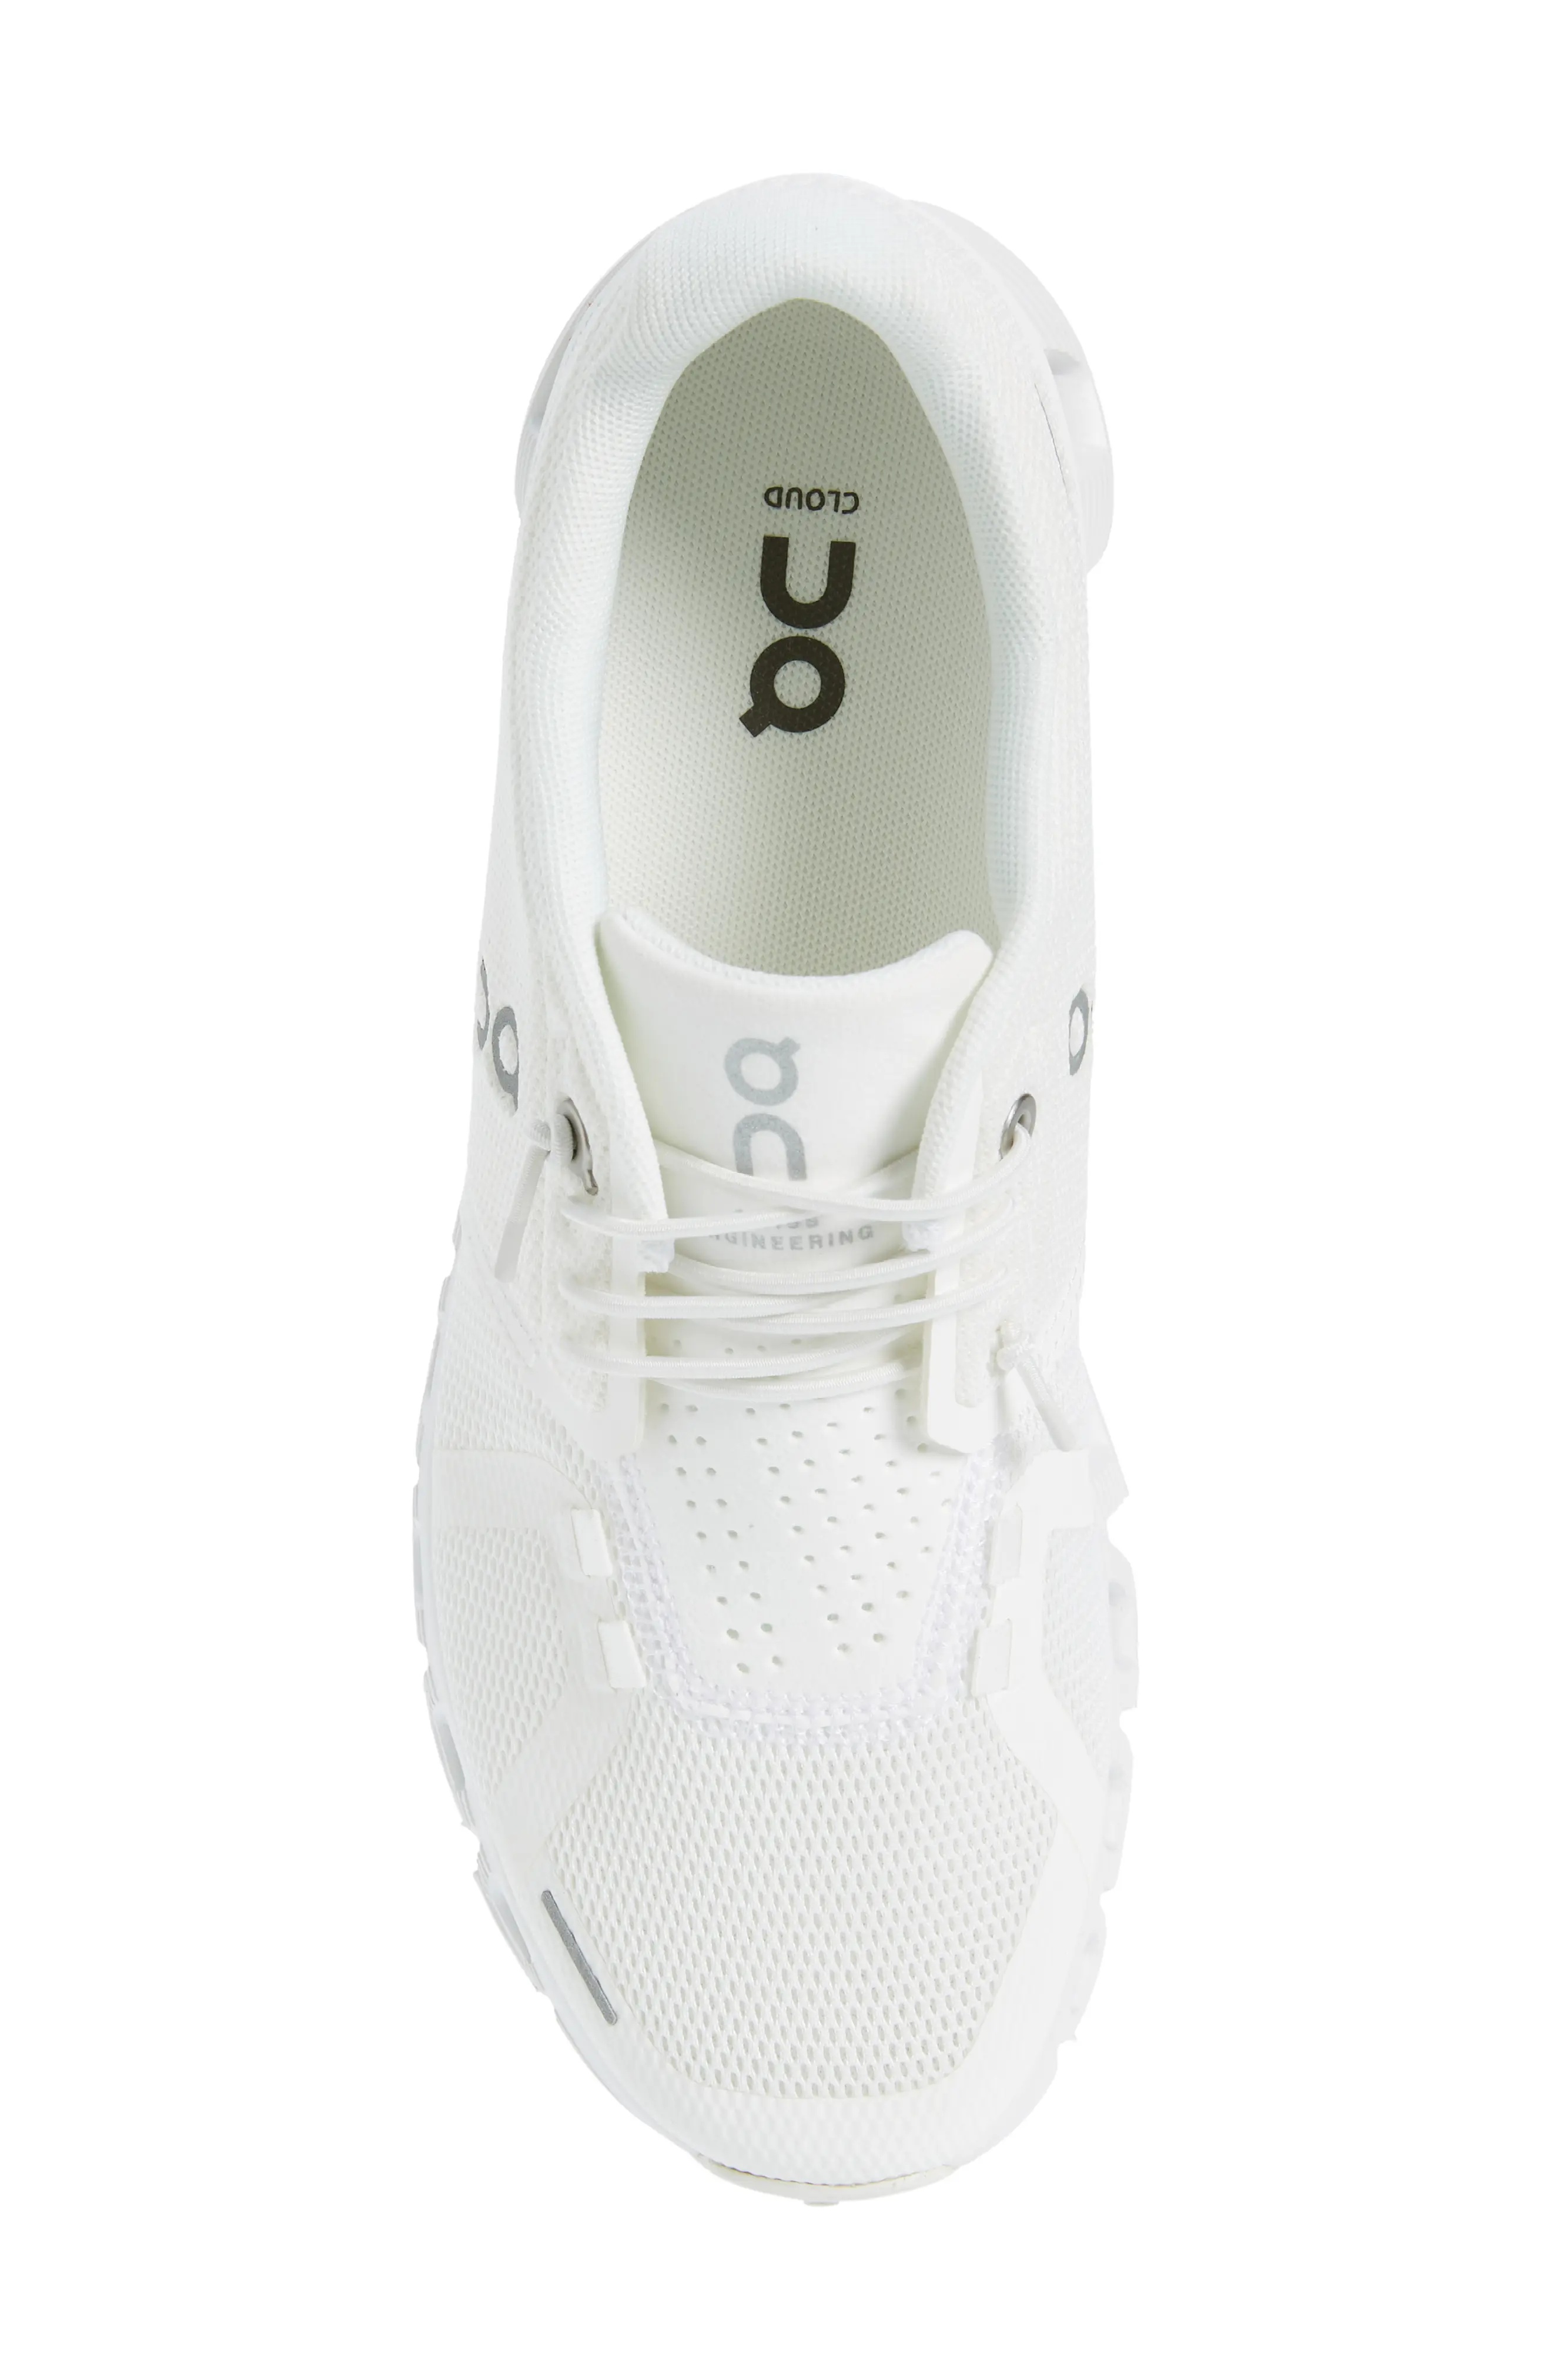 Cloud 5 Running Shoe in Undyed White/White - 5